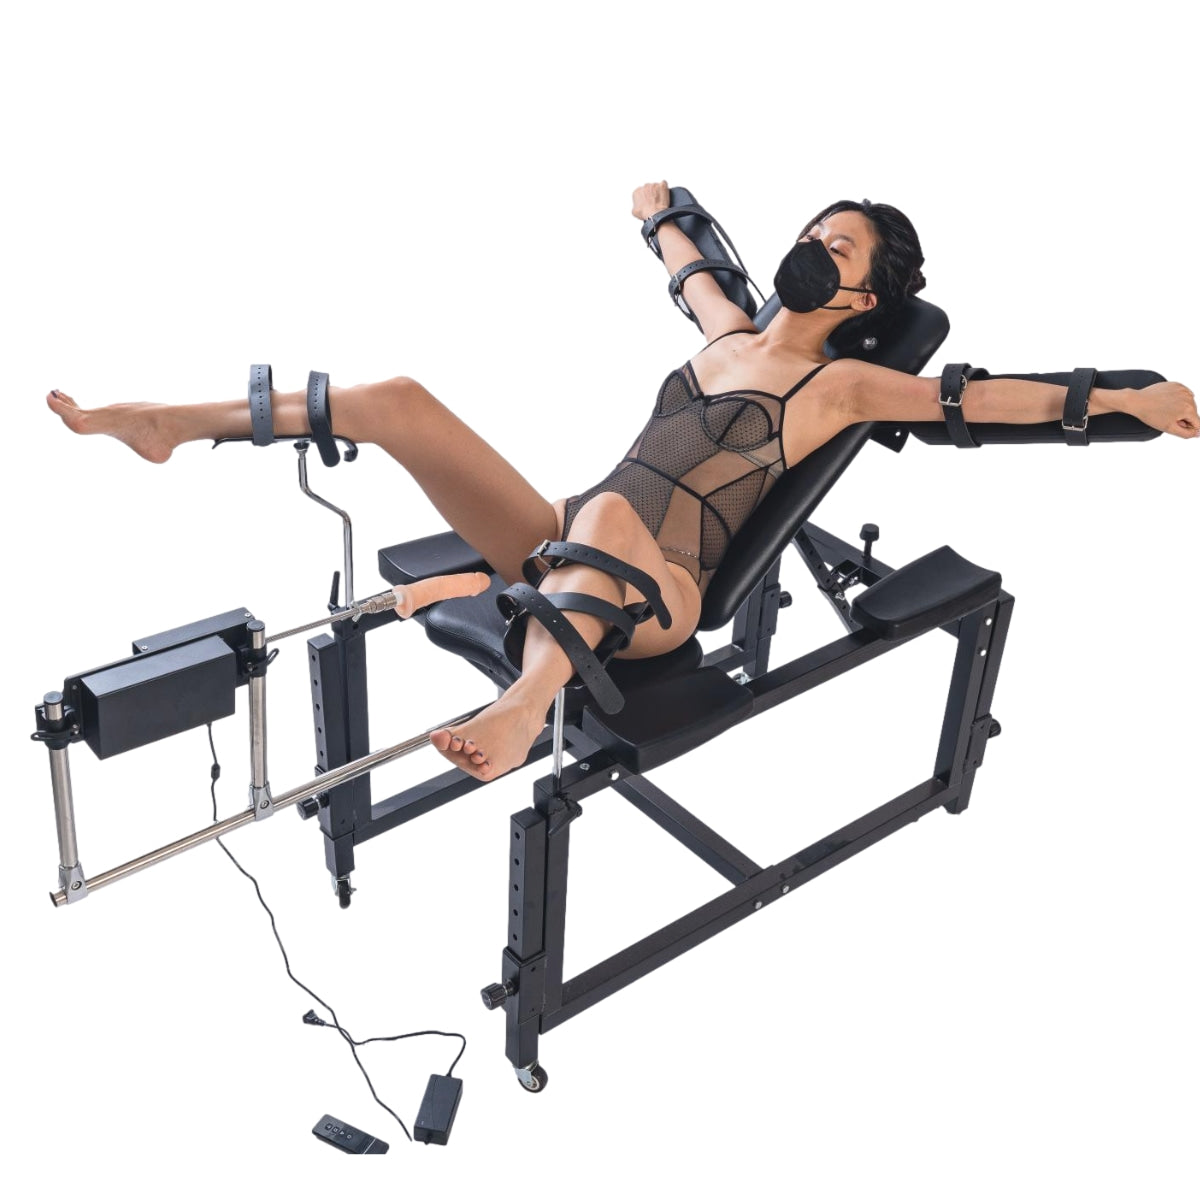 Sex Machine for the Lux Bench (15-21 business days shipping time)